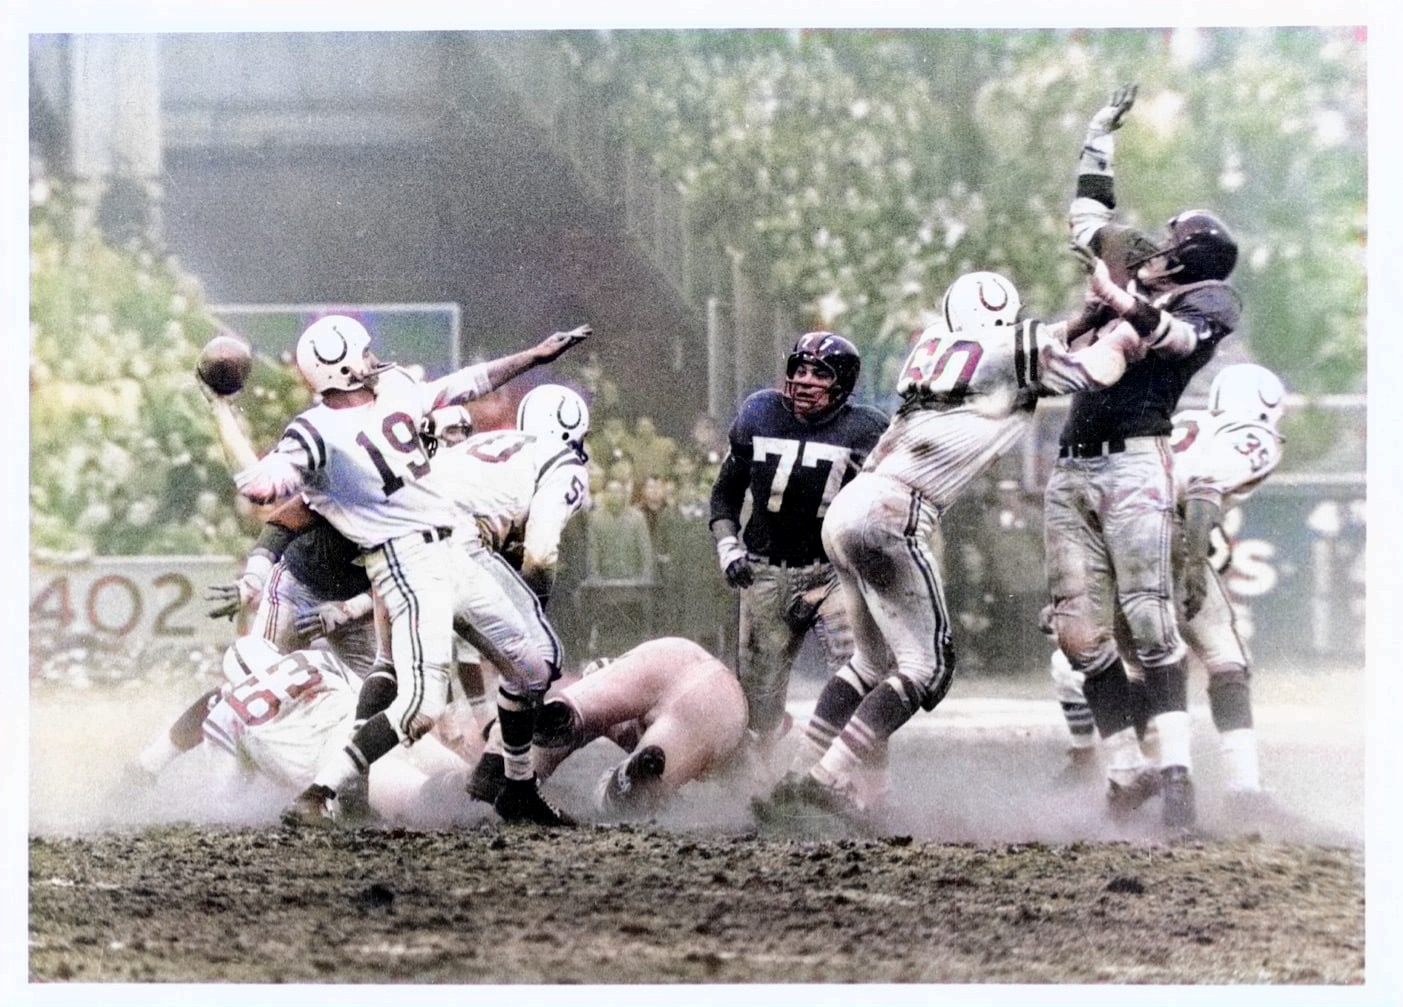 1958 NFL Championship Game between Baltimore Colts and NY Giants . Johnny Unitas throwing a long pass. Photo from the Baltimore Sun News wire many years ago..Colorized by me in 2022.